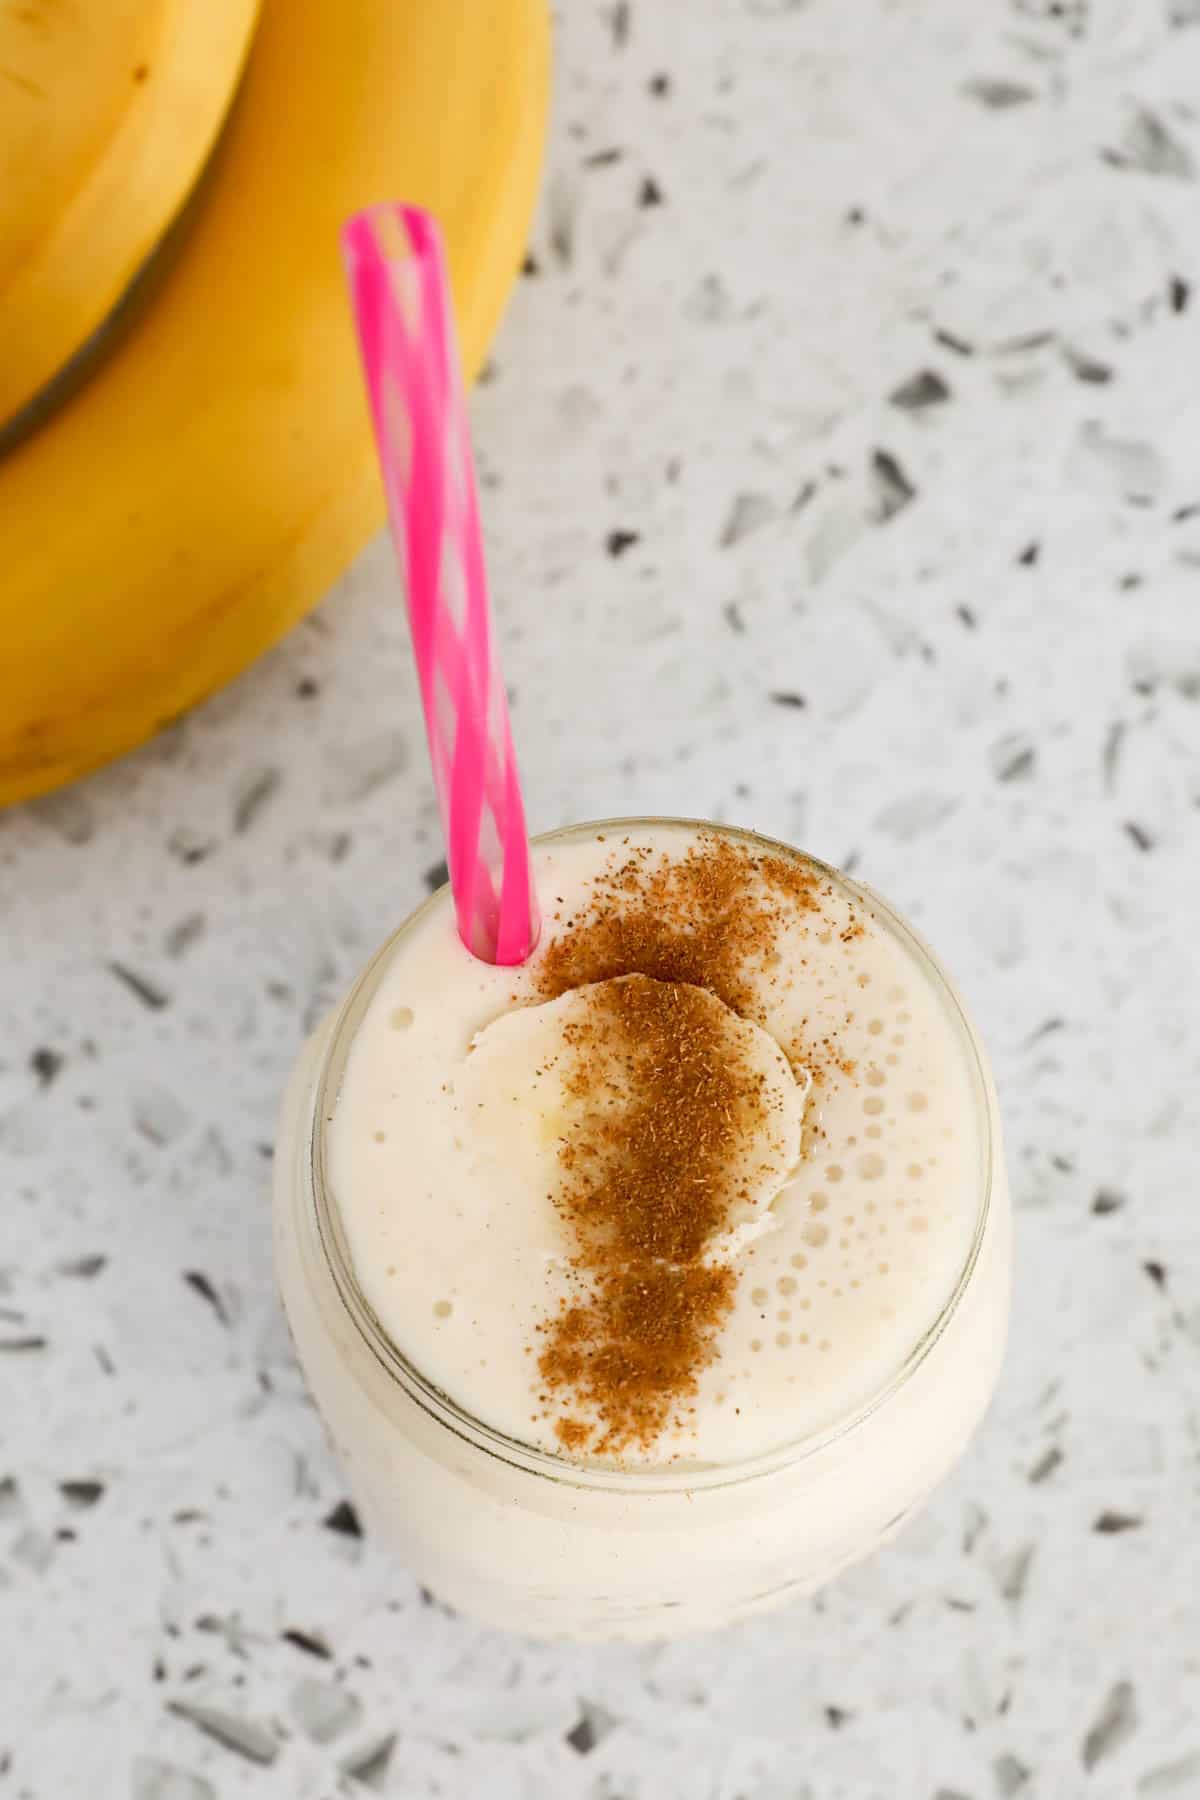 Cinnamon sprinkled over the top of a thick and creamy drink.